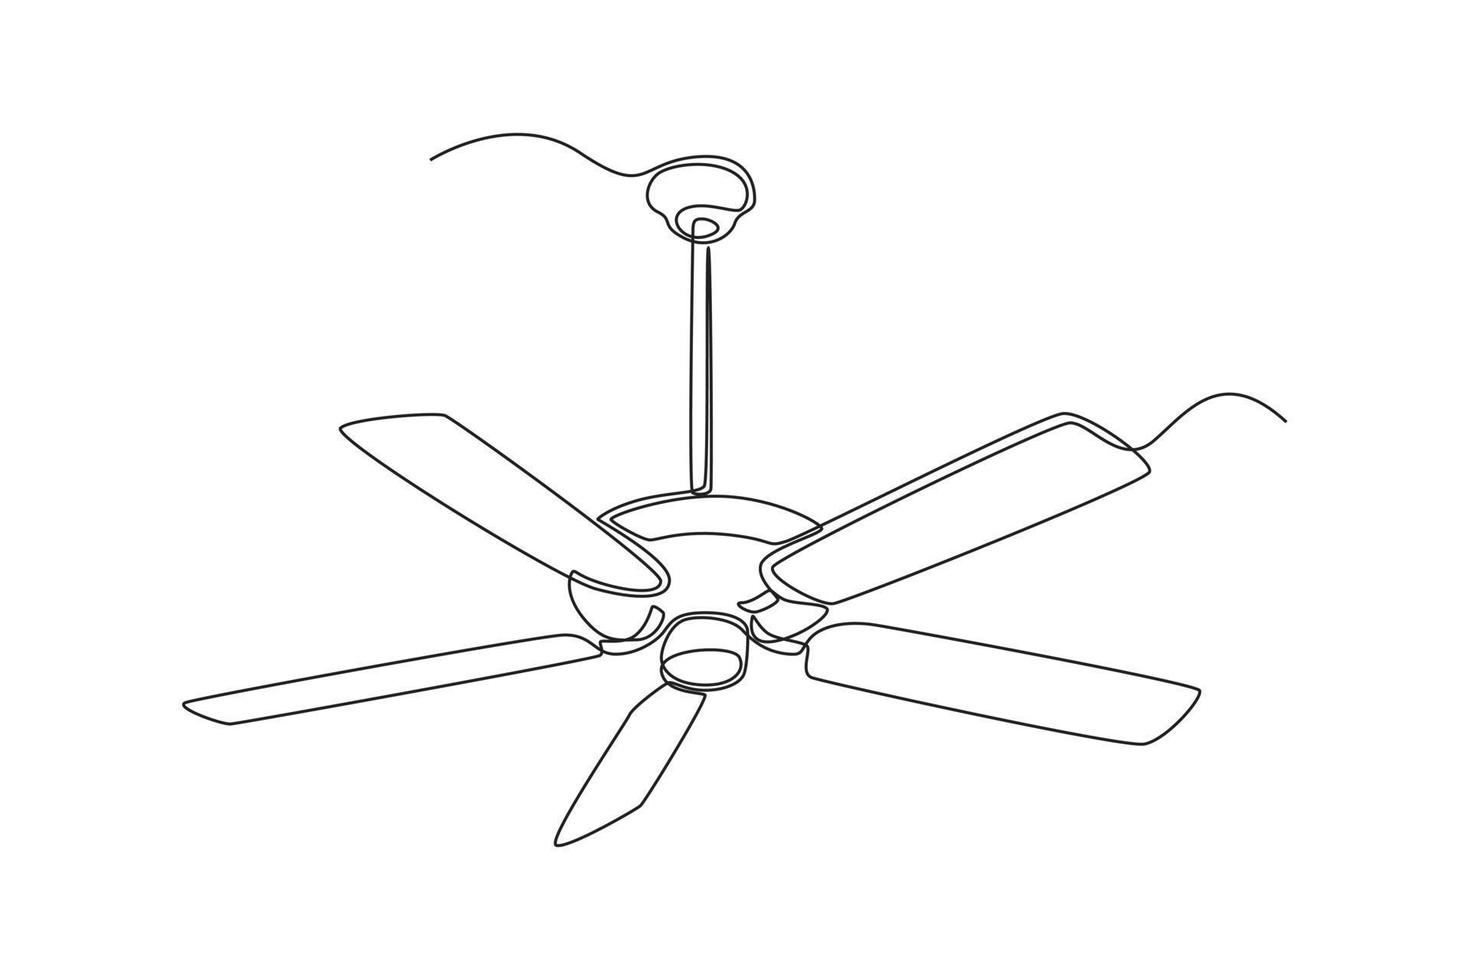 Single one line drawing Electric ceiling fan. Electricity home appliance concept. Continuous line draw design graphic vector illustration.